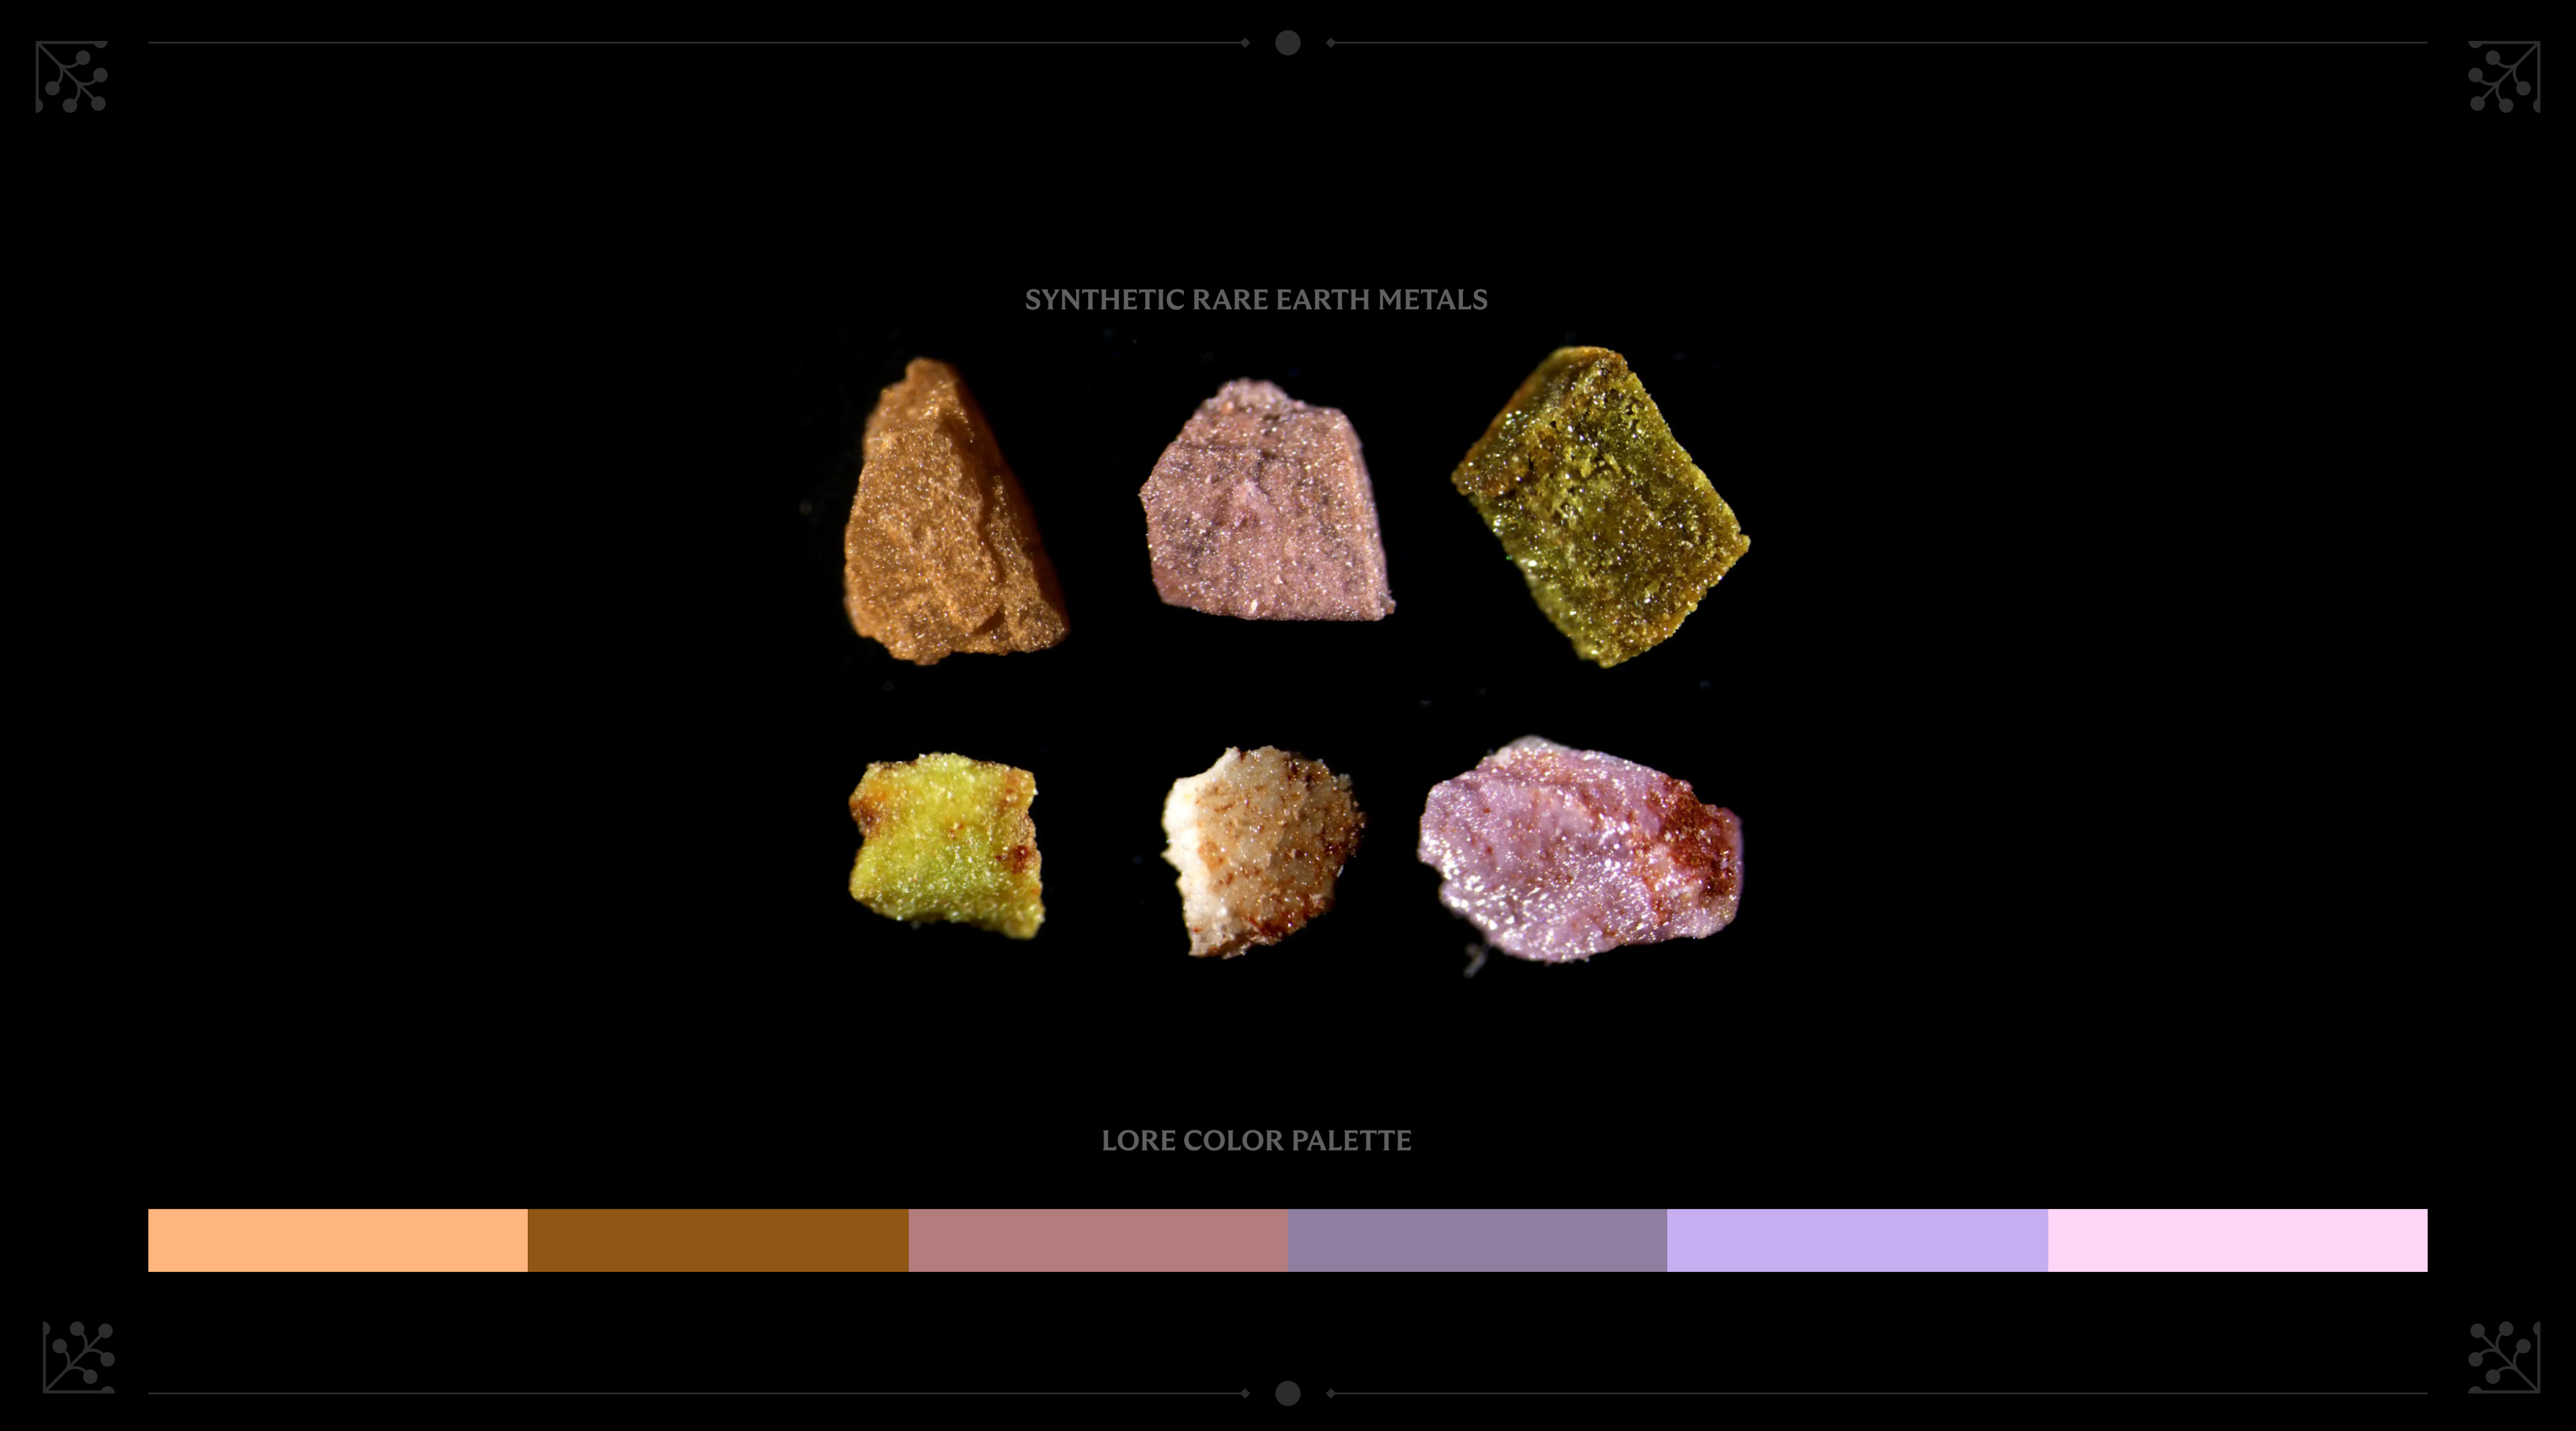 Color palette based on synthetic rare earth metals